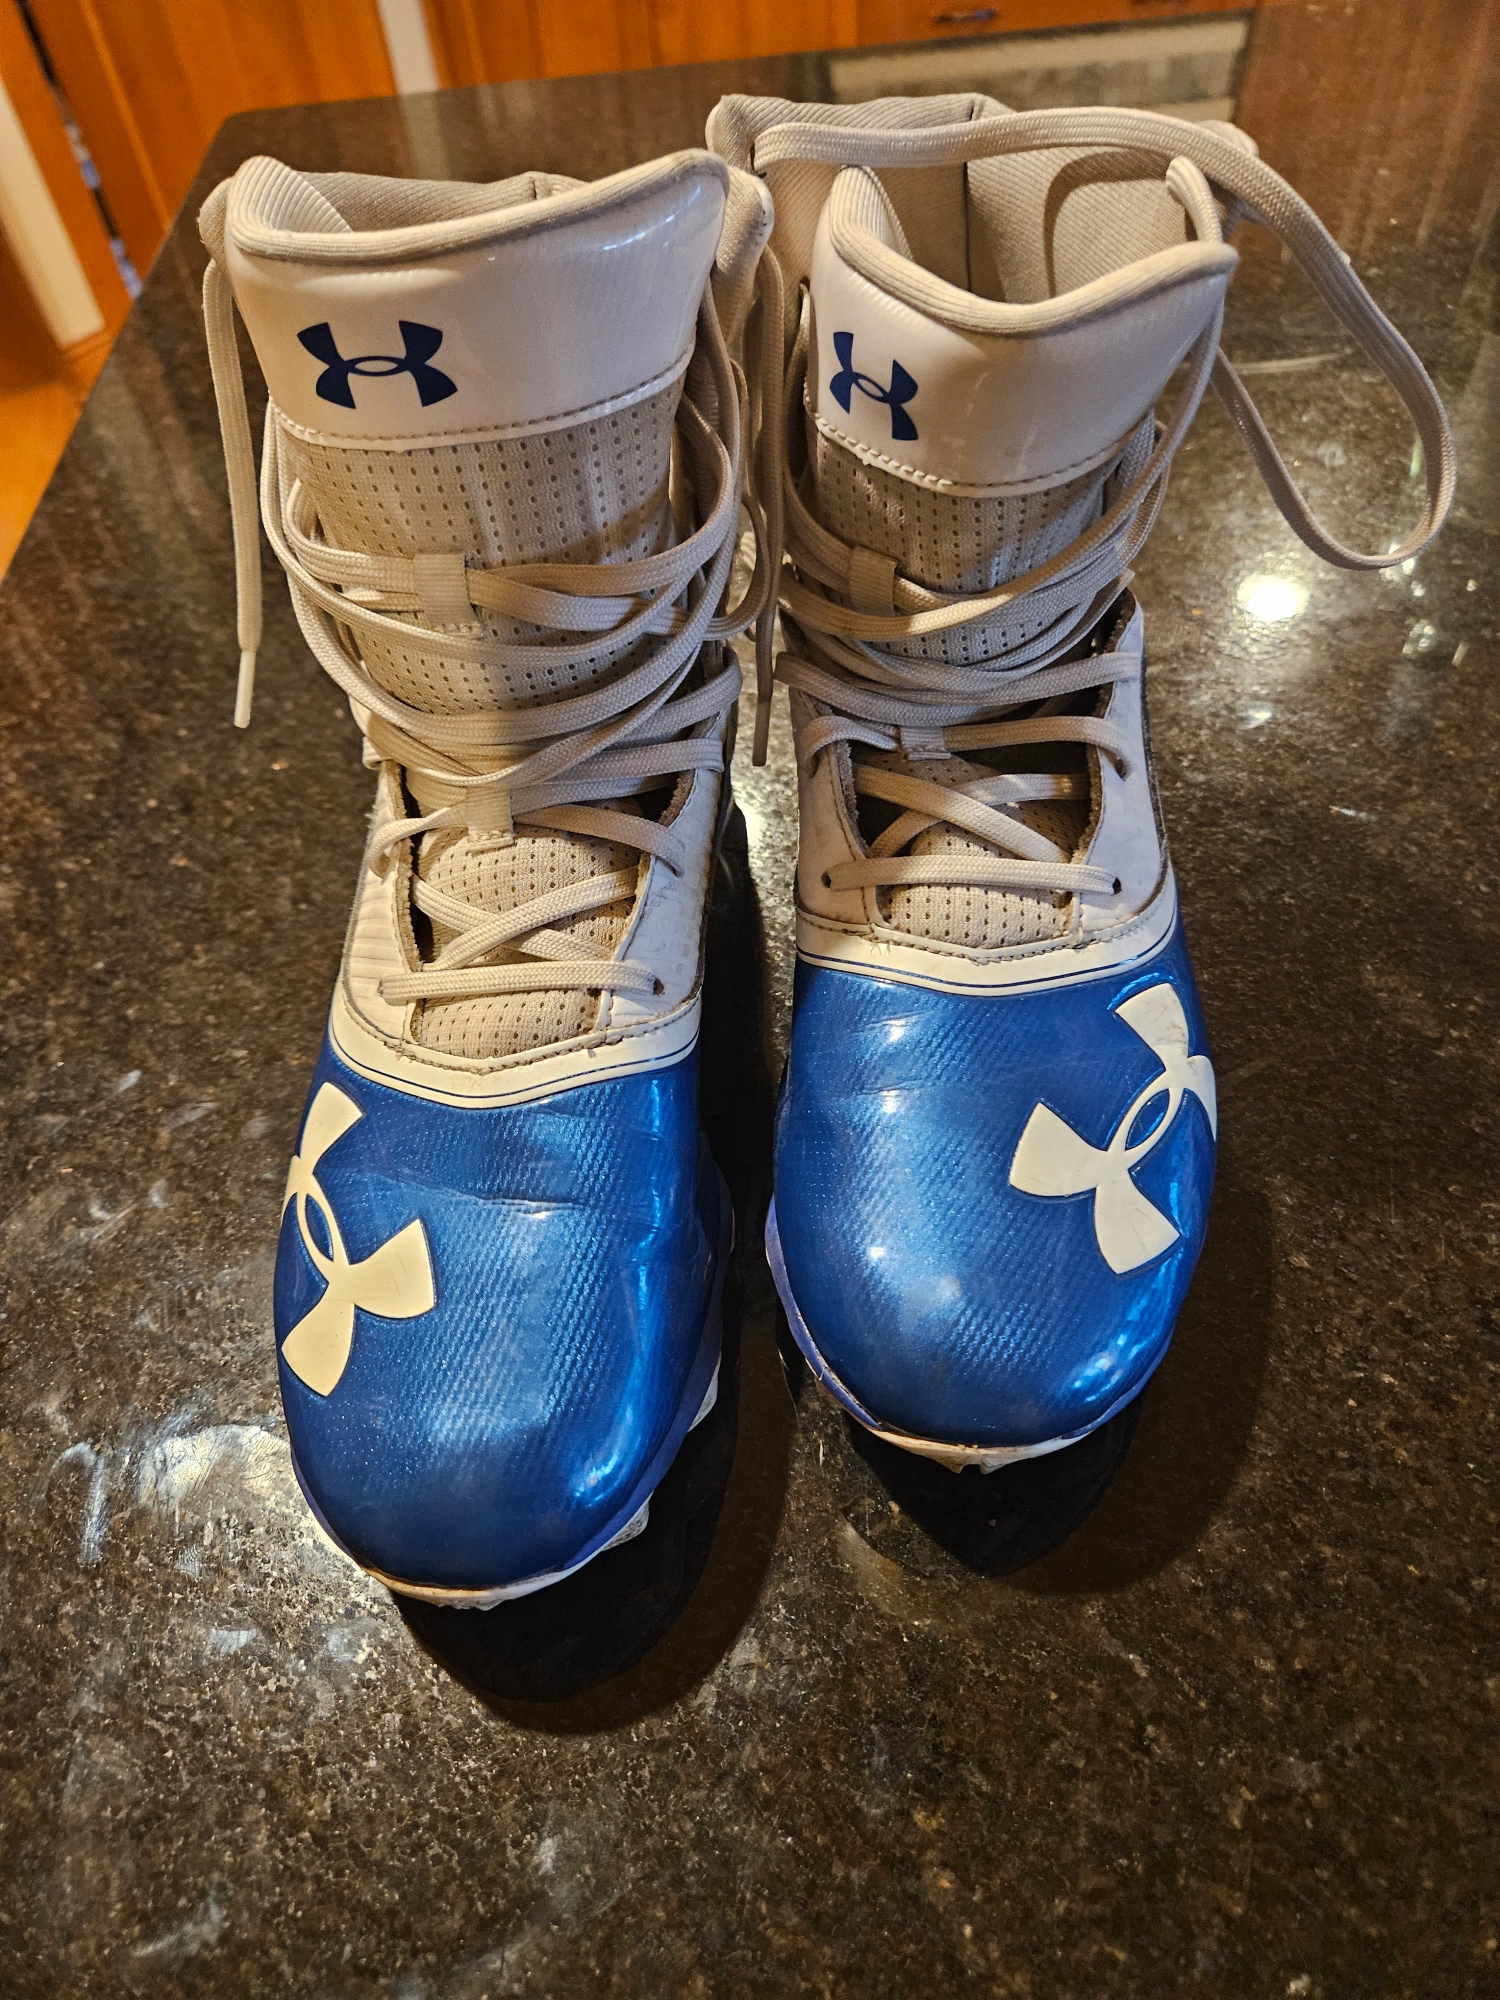 Used Men's Size 8.0 (Women's 9.0) Molded Cleats Under Armour High Top